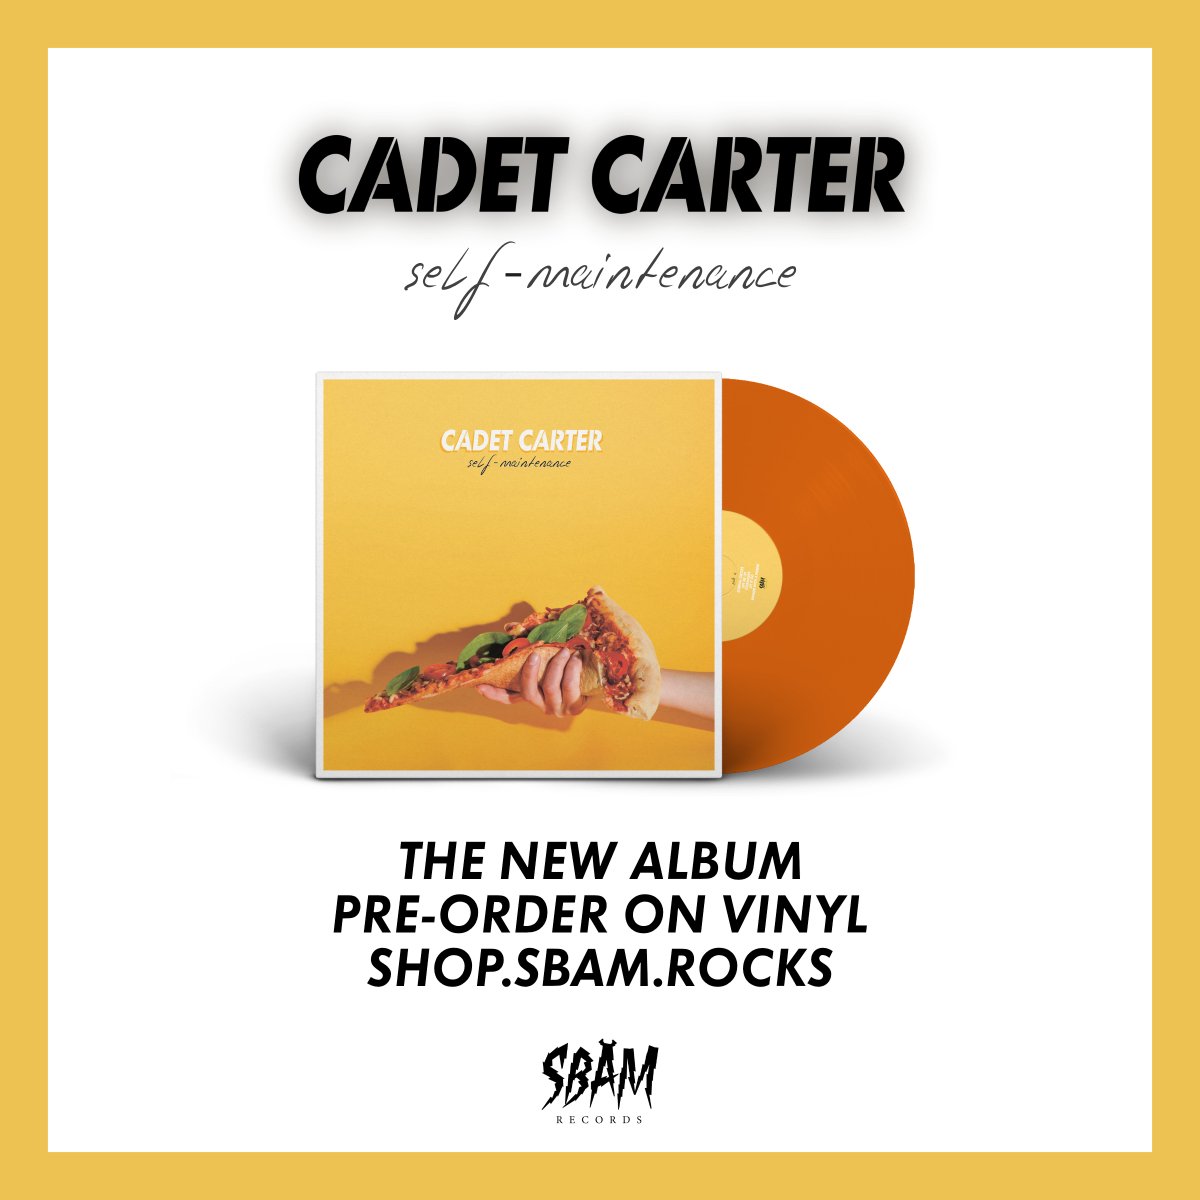 REMINDER! Pre-order Cadet Carter „Self-Maintenance“ NOW! Grab one of the exclusive variants now while you still can! Album is gonna be out April 12!🤘 SBAM Shop (EU/US/CAN): shop.sbam.rocks #preorder #cadetcarter #sbam